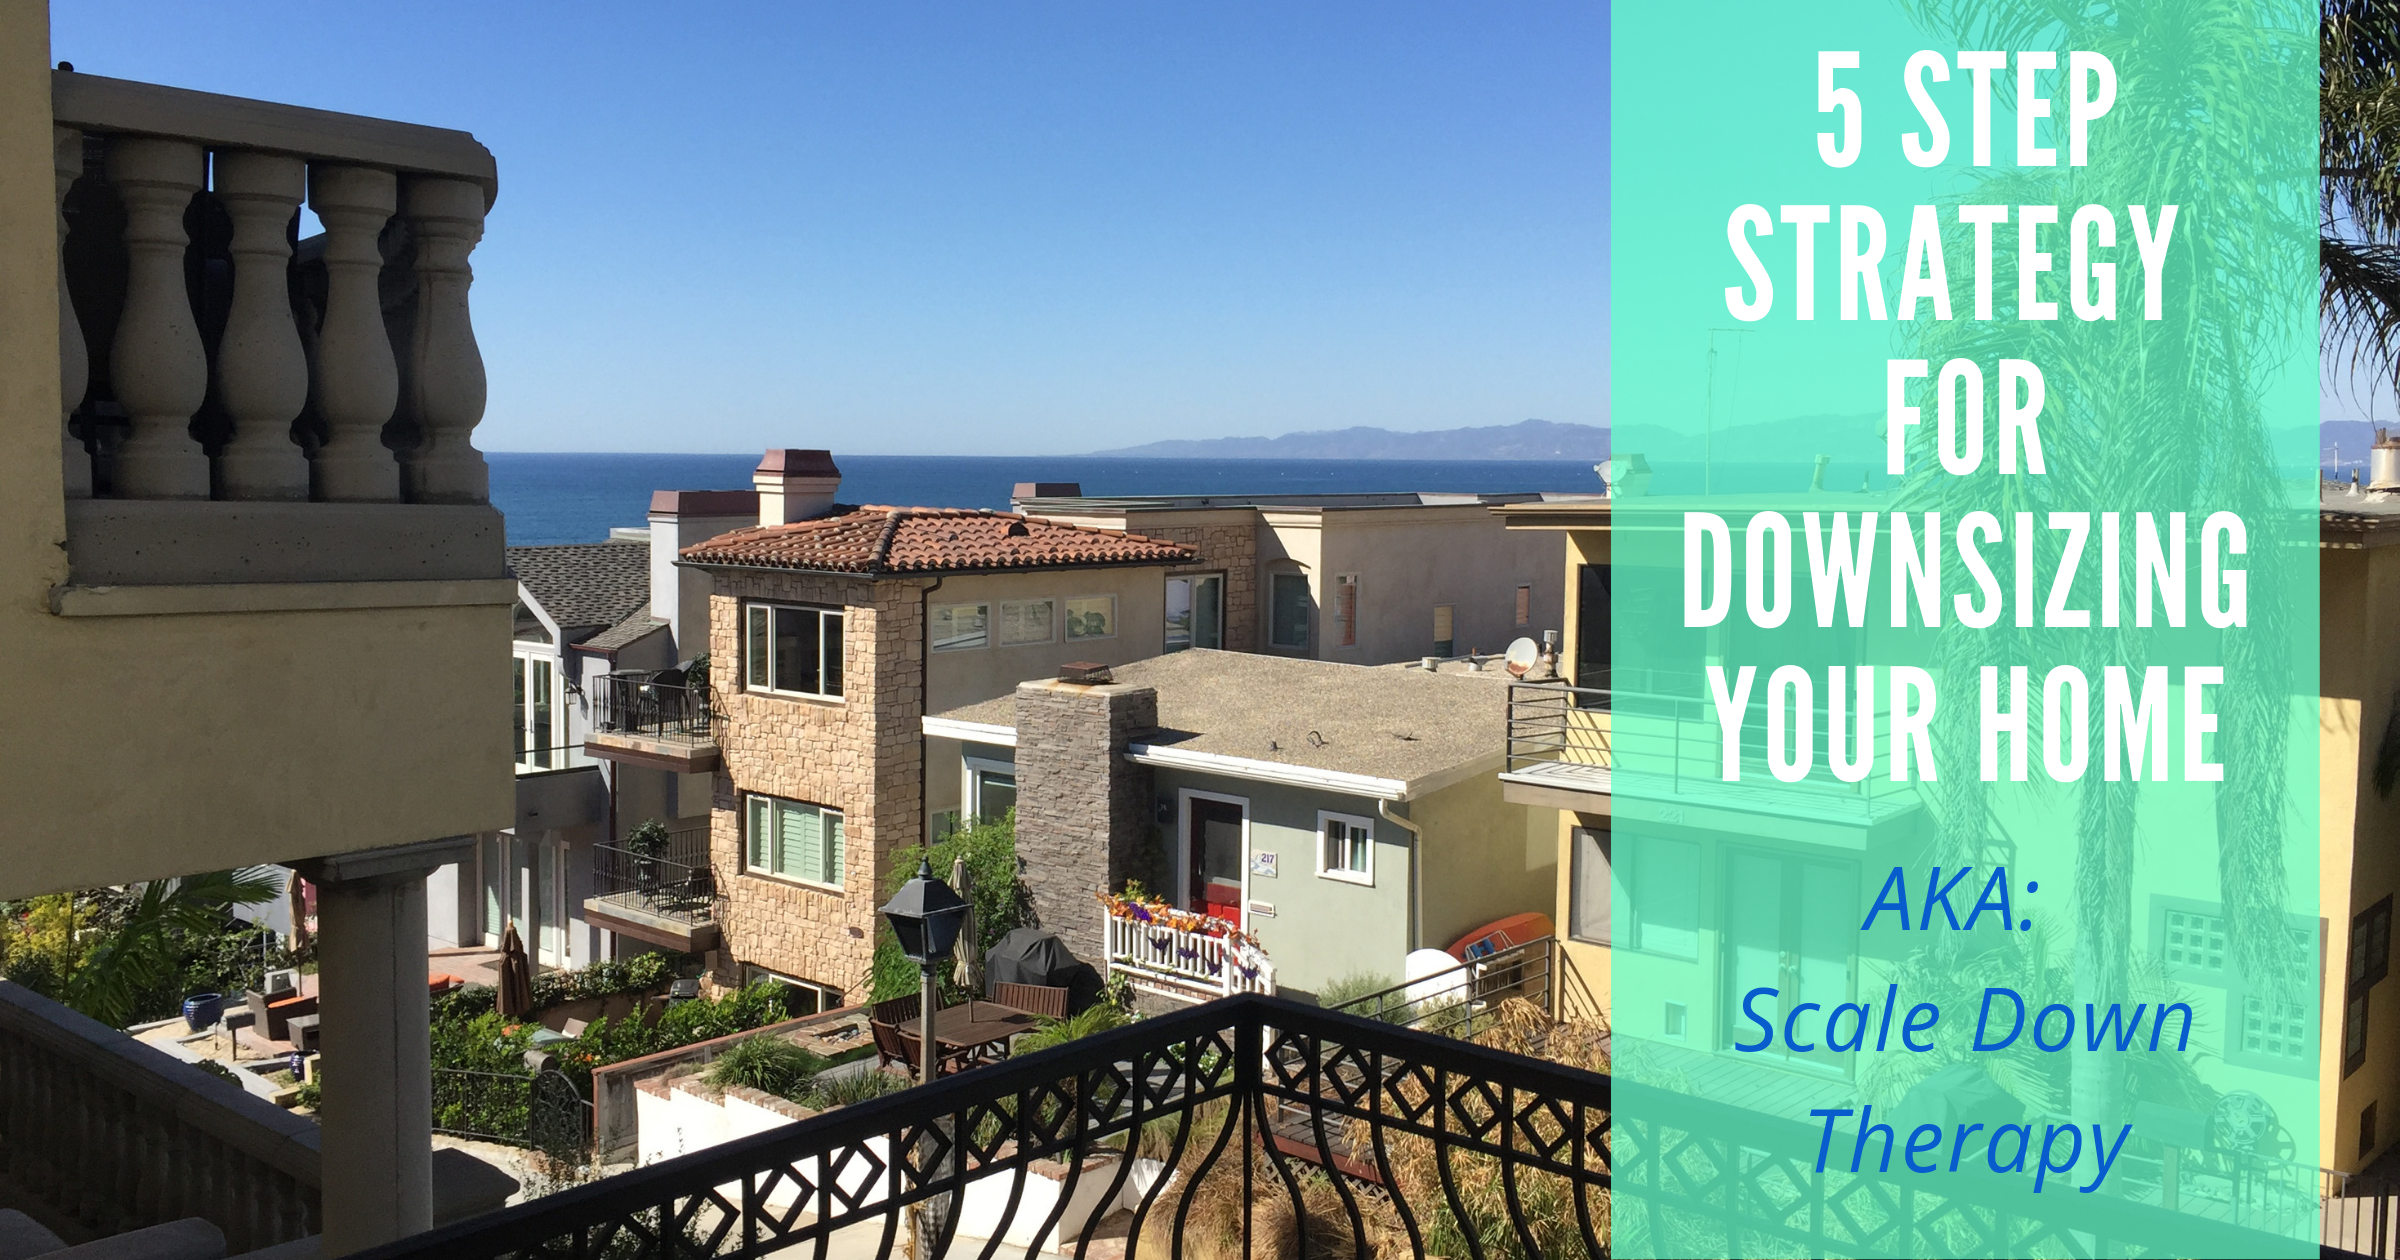 5 Step strategy for downsizing your home